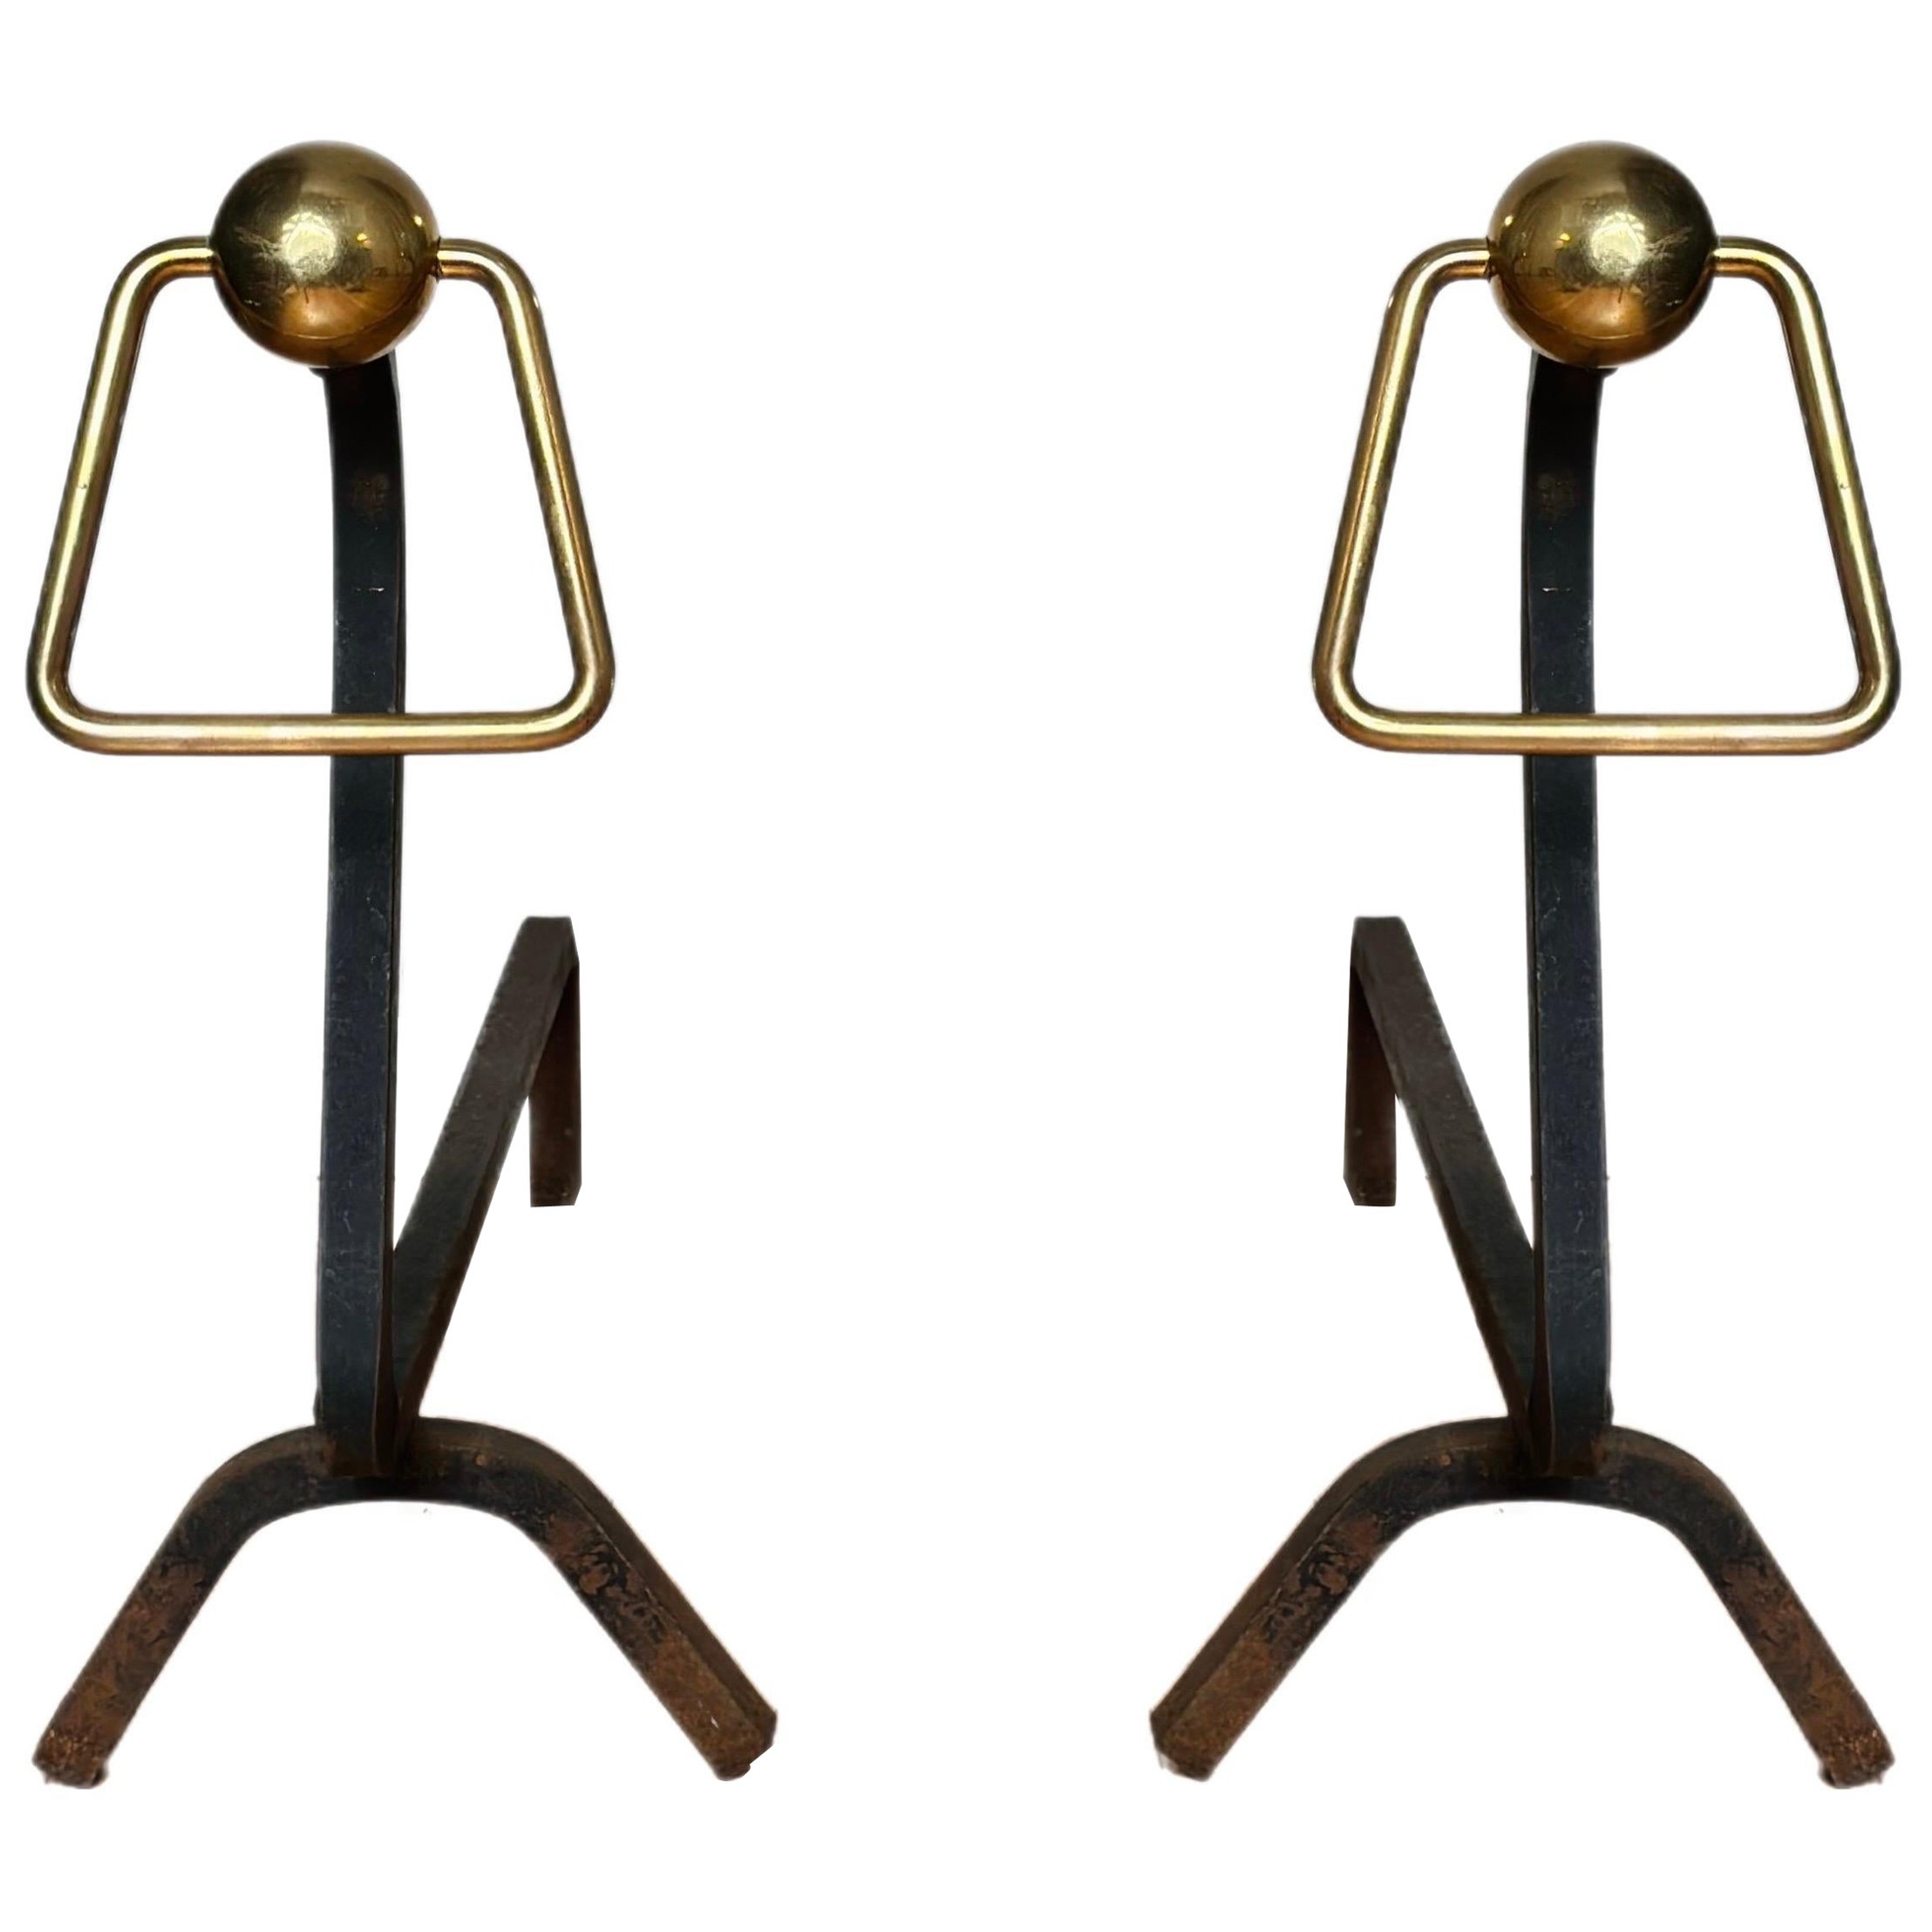 1940s Modernist Jacques Adnet Style Wrought Iron and Brass Andirons - a Pair